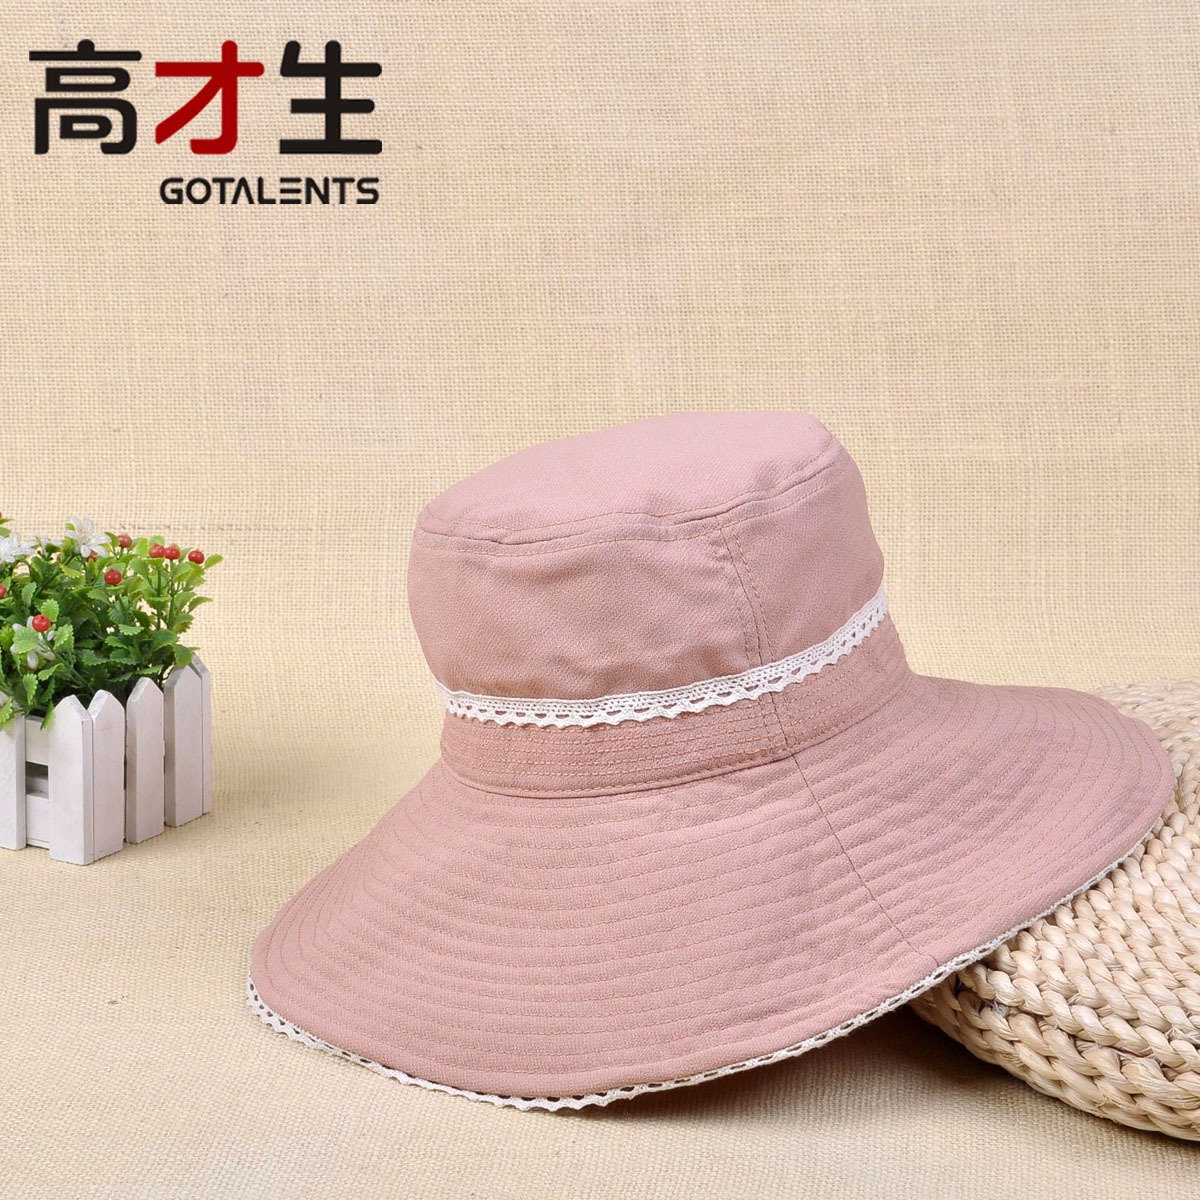 Free shipping lady's spring and summer Large brimmed hat elegant lace decoration sunbonnet